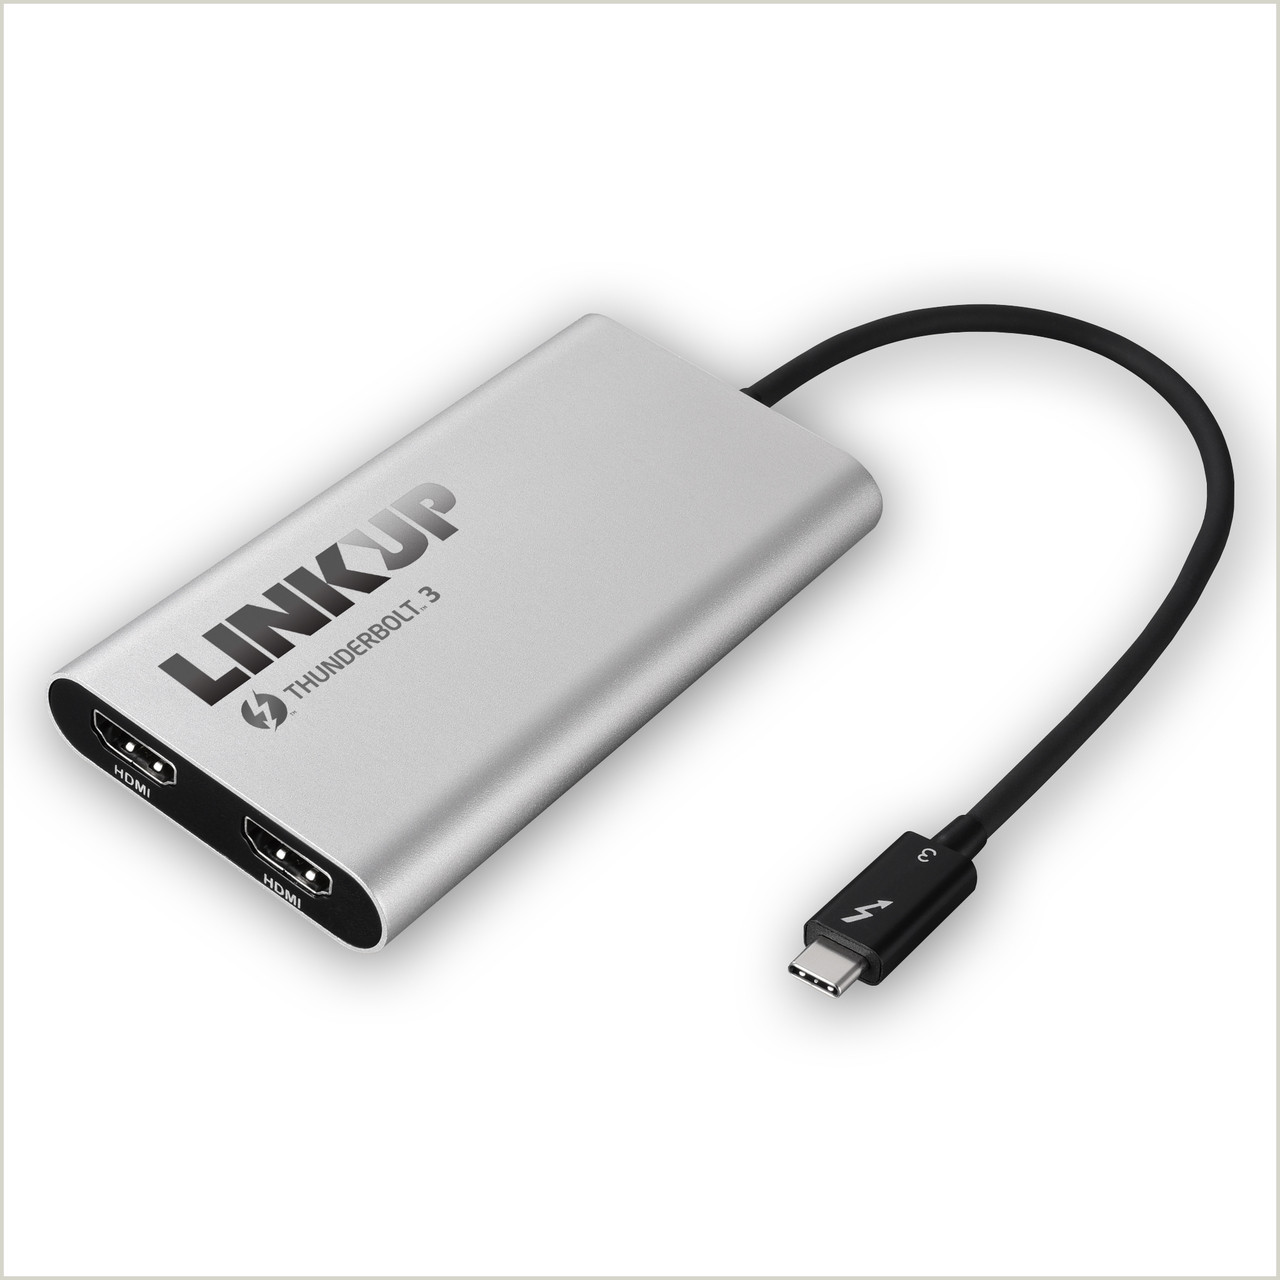 Certified Linkup 19 Thunderbolt 3 To Dual Hdmi 2 0 Ultra 4k 60hz Adapter For Mac Windows